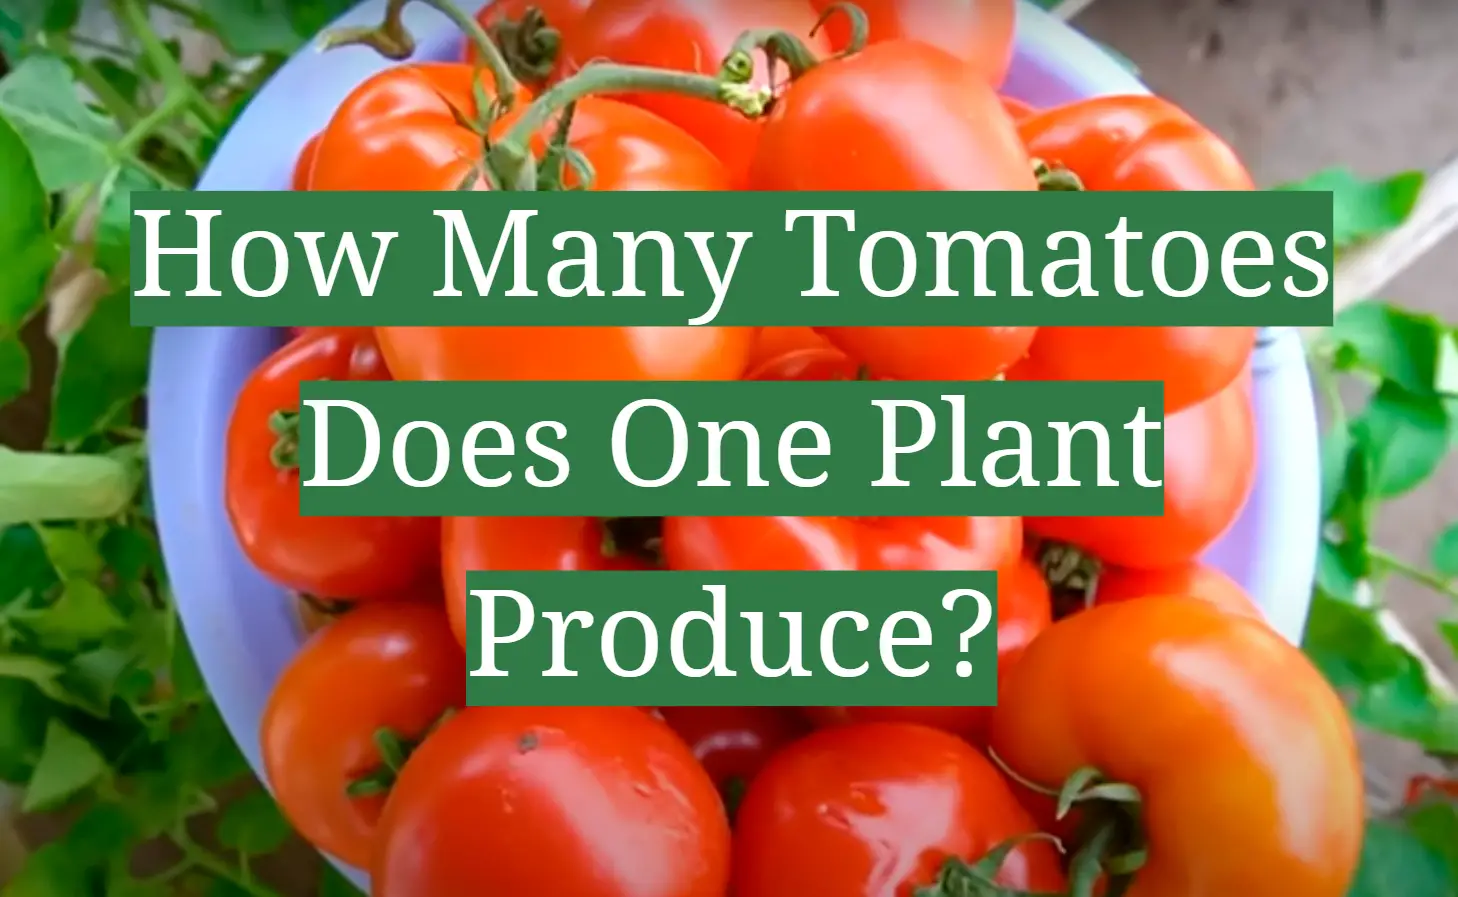 How Many Tomatoes Does One Plant Produce?